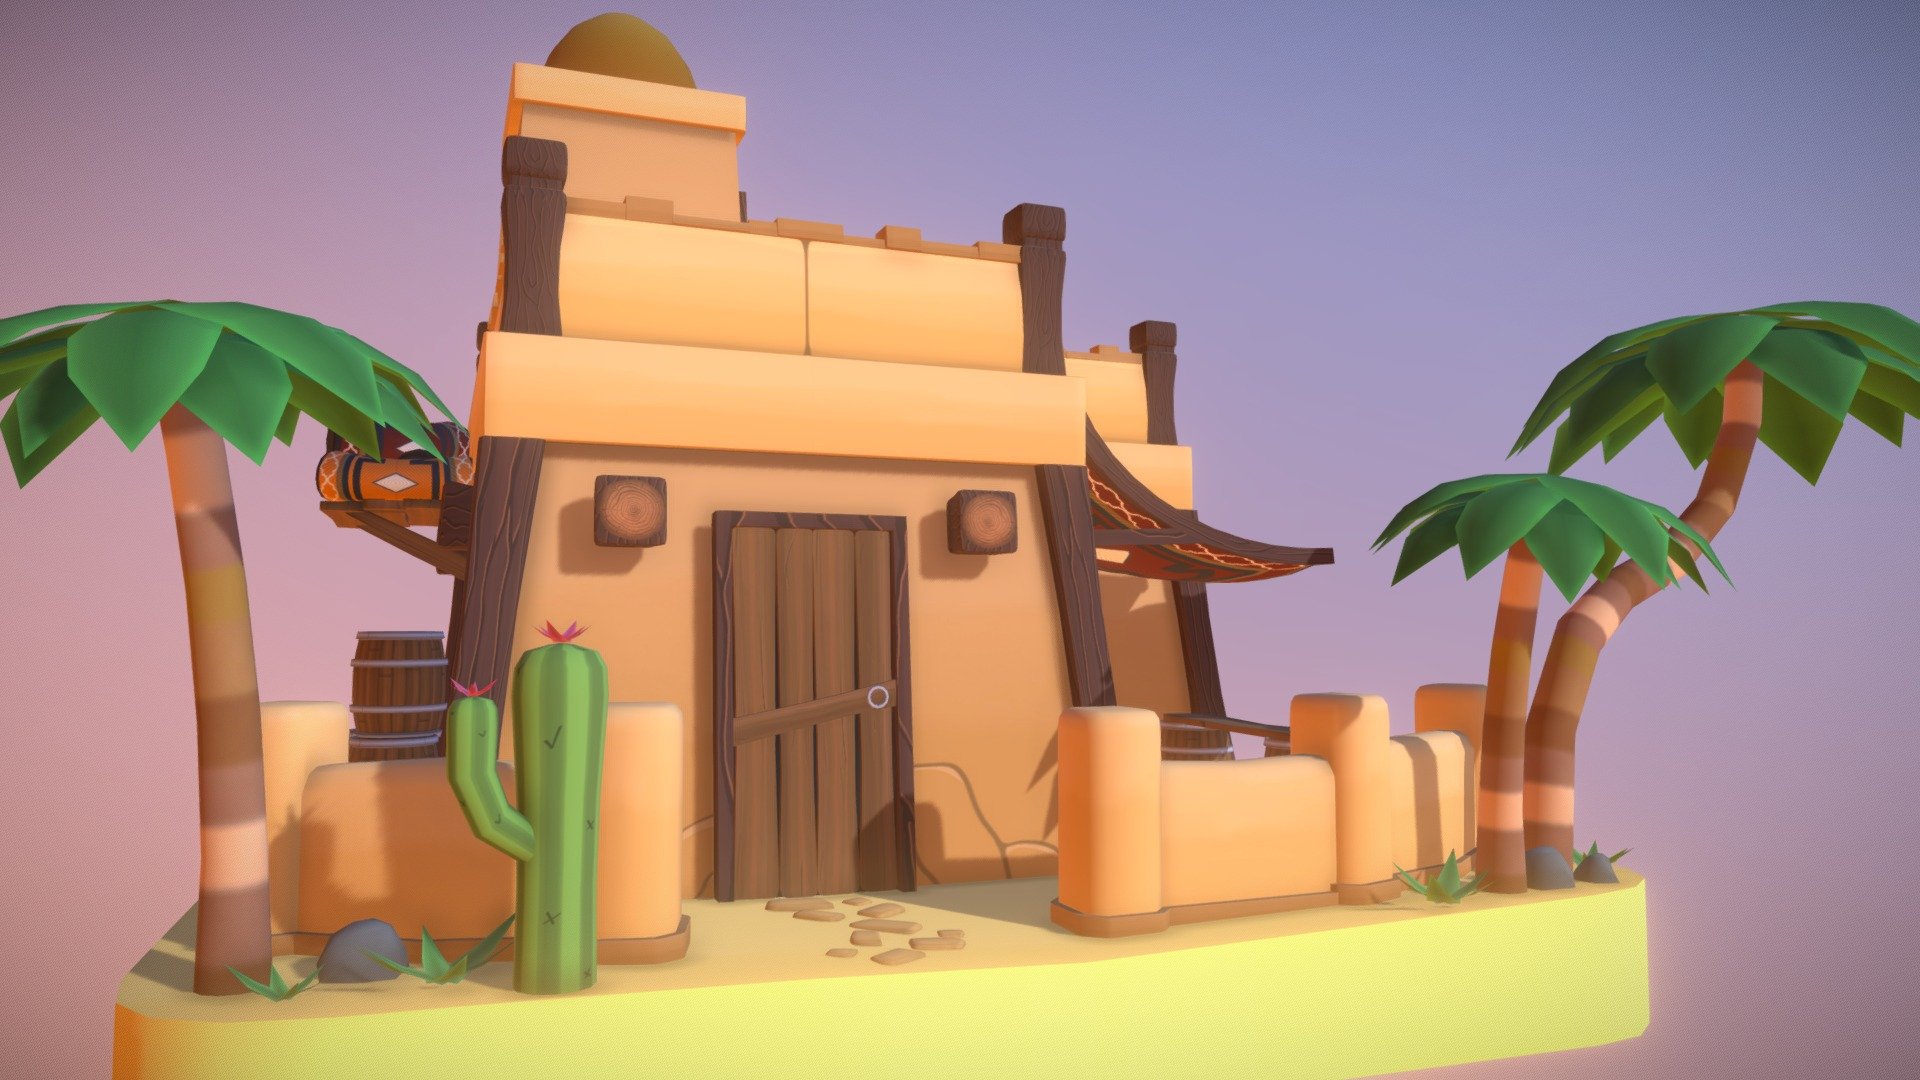 A Model Created for this years final assignement for Game Art at DAE.

All Models and Textures were created by me.

The goal of this assignement was to create a house from an ancient civilization with 1 meter of surroundings 3d model